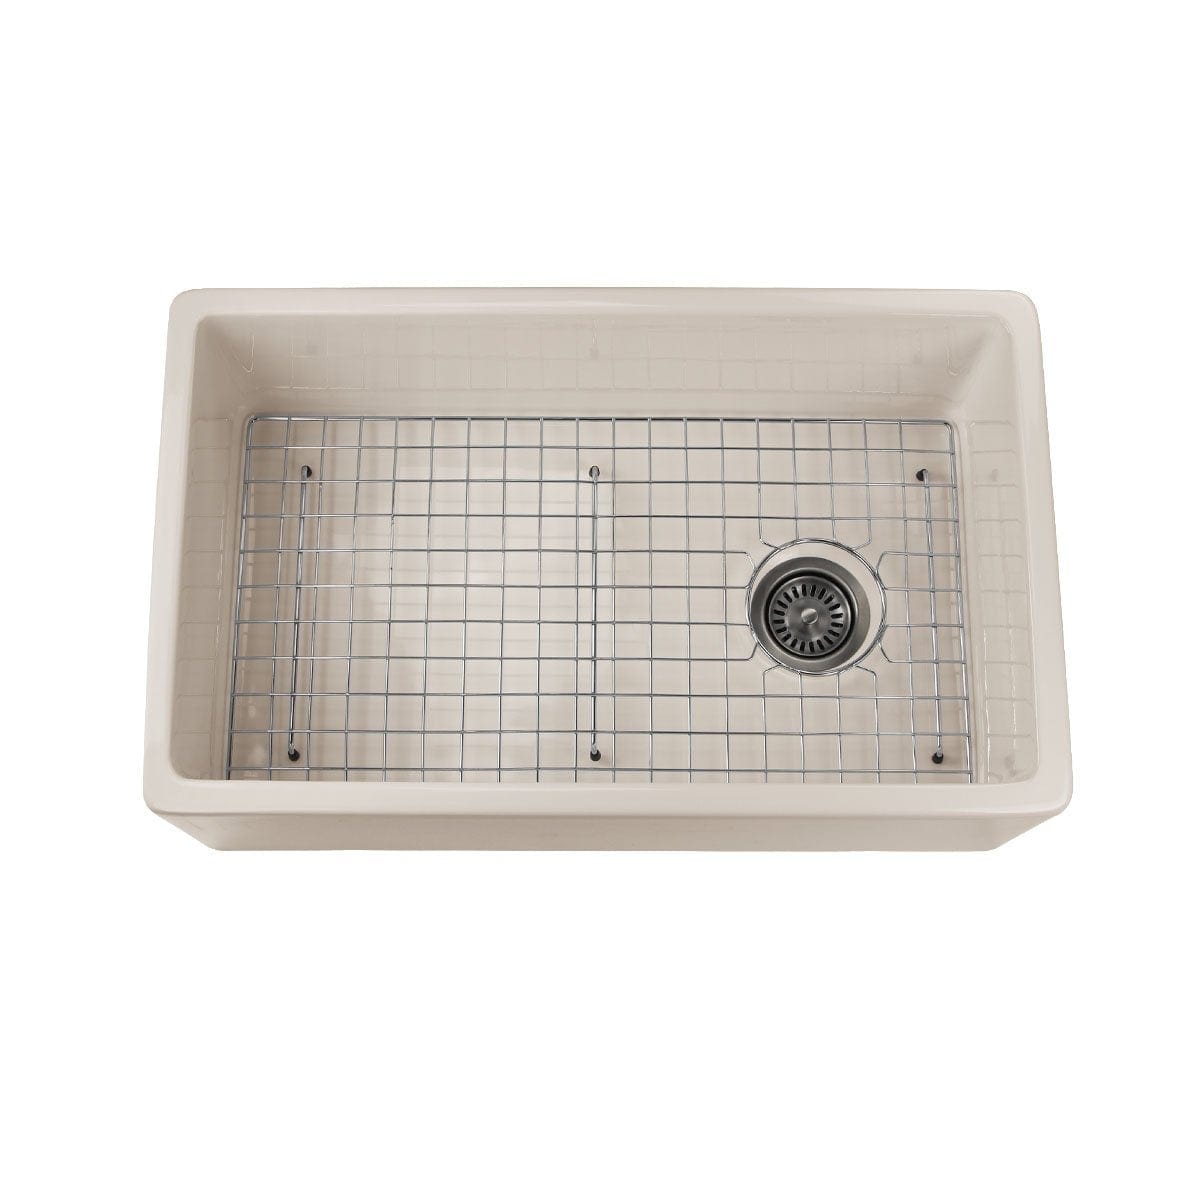 Nantucket 30" Bisque Fireclay Farmhouse Kitchen Sink Offset Drain with Grid - FCFS30B - Manor House Sinks